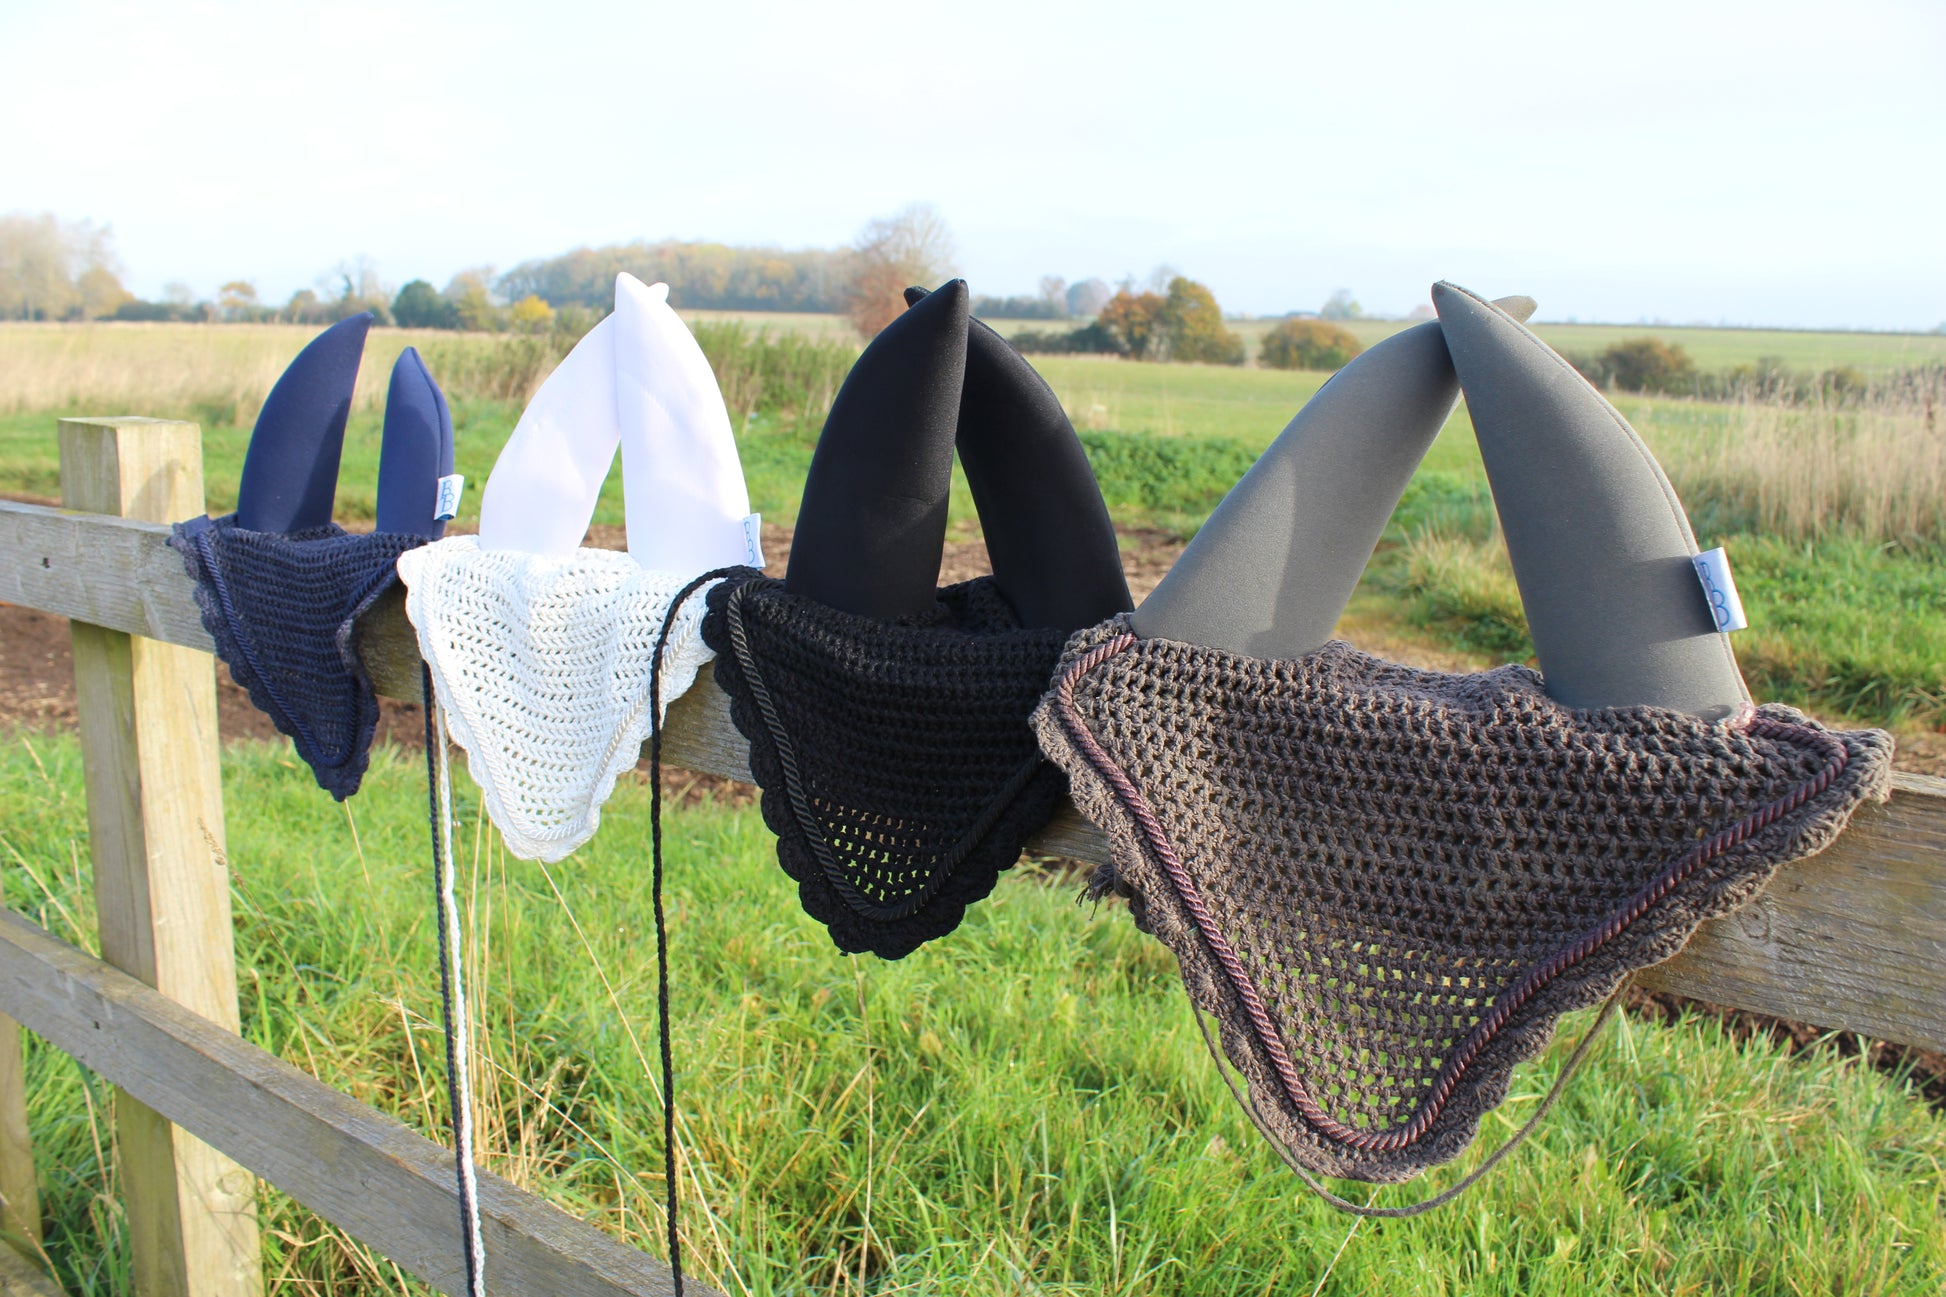 4 soundproof ear bonnets in grey, black, white and navy on a fence 